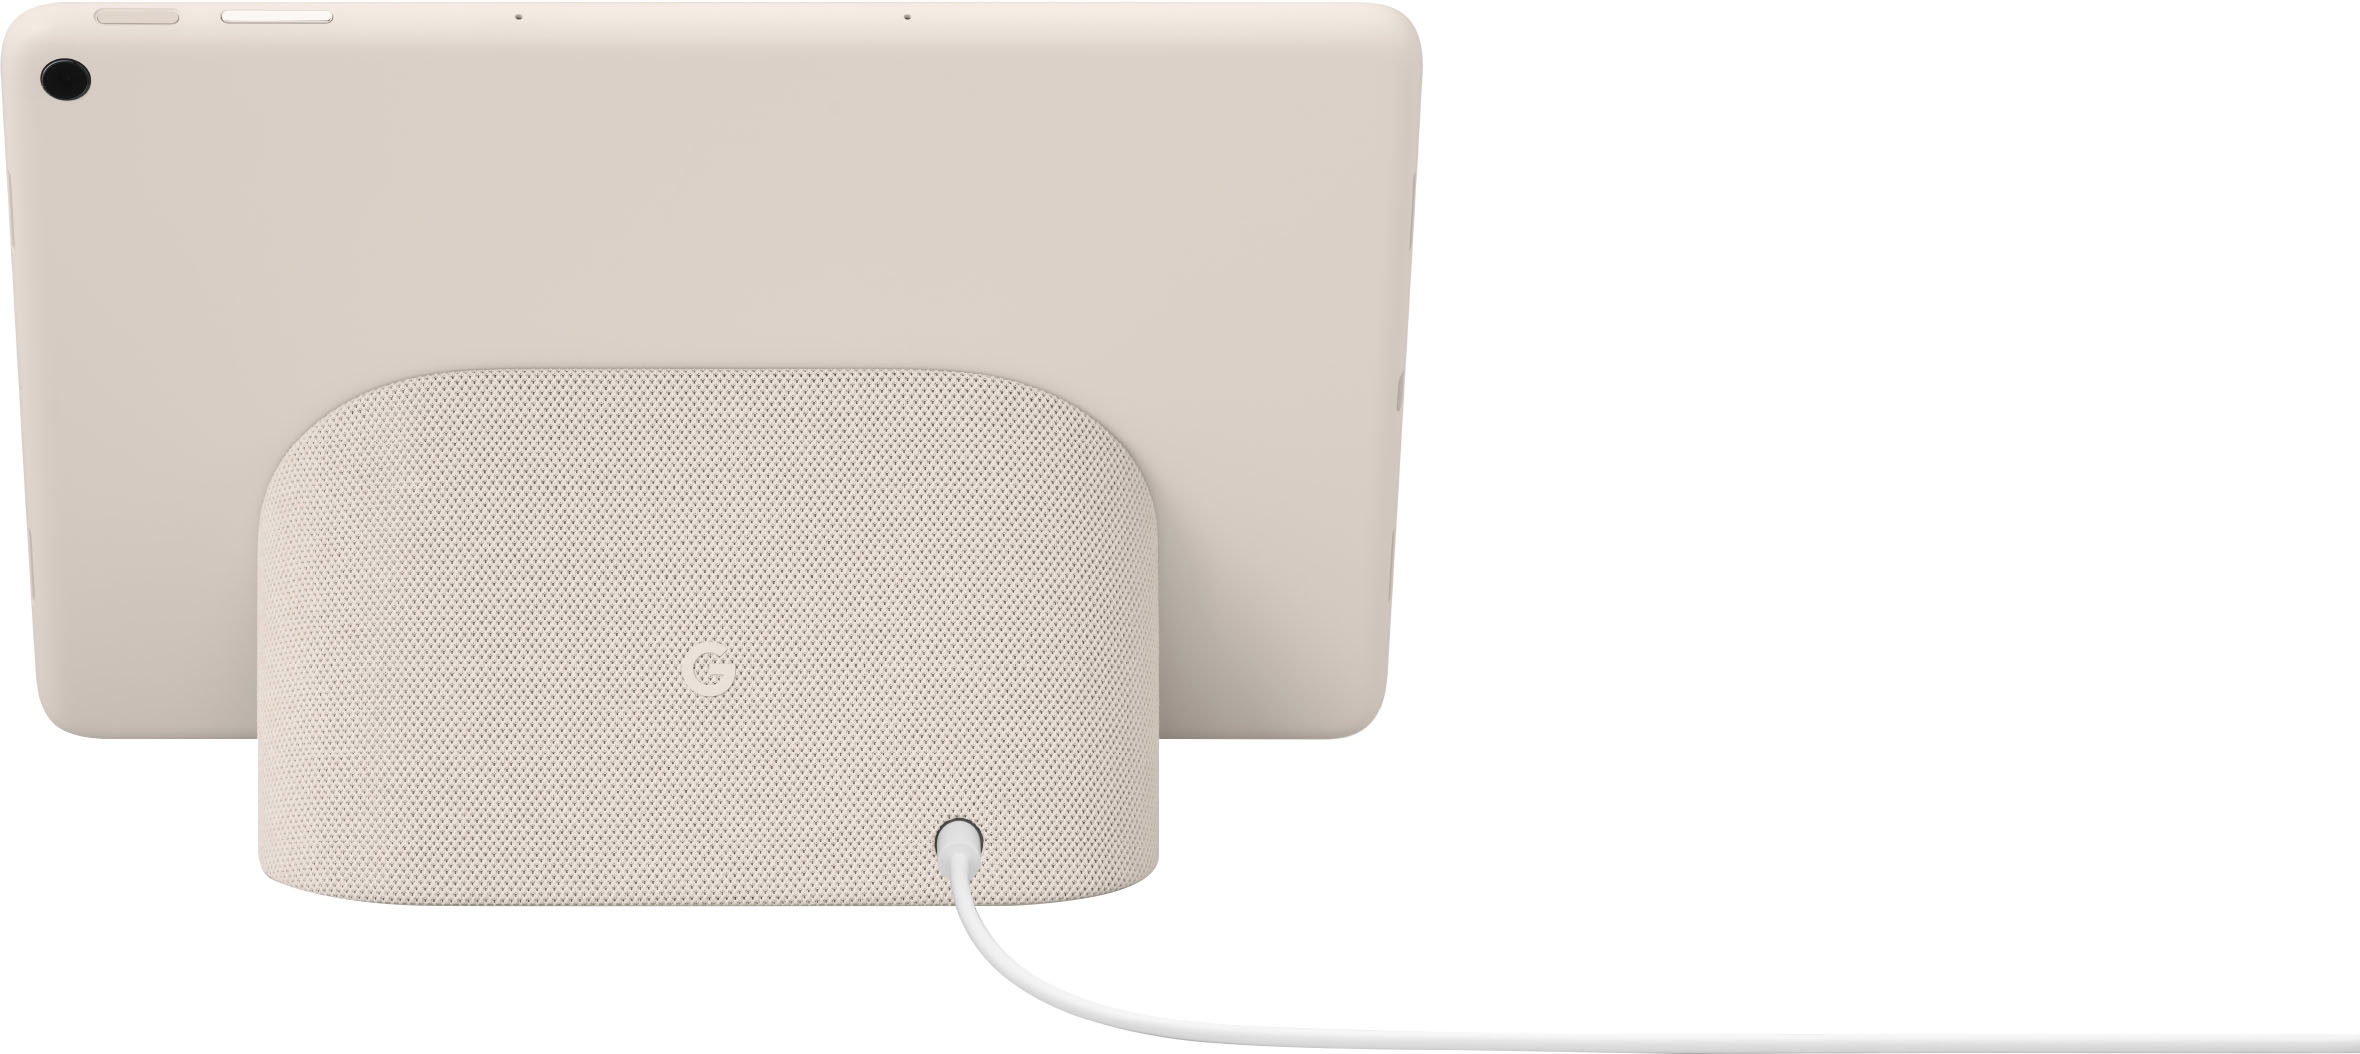 Google Charging Dock Android with Best Pixel - GA04750-US 11\